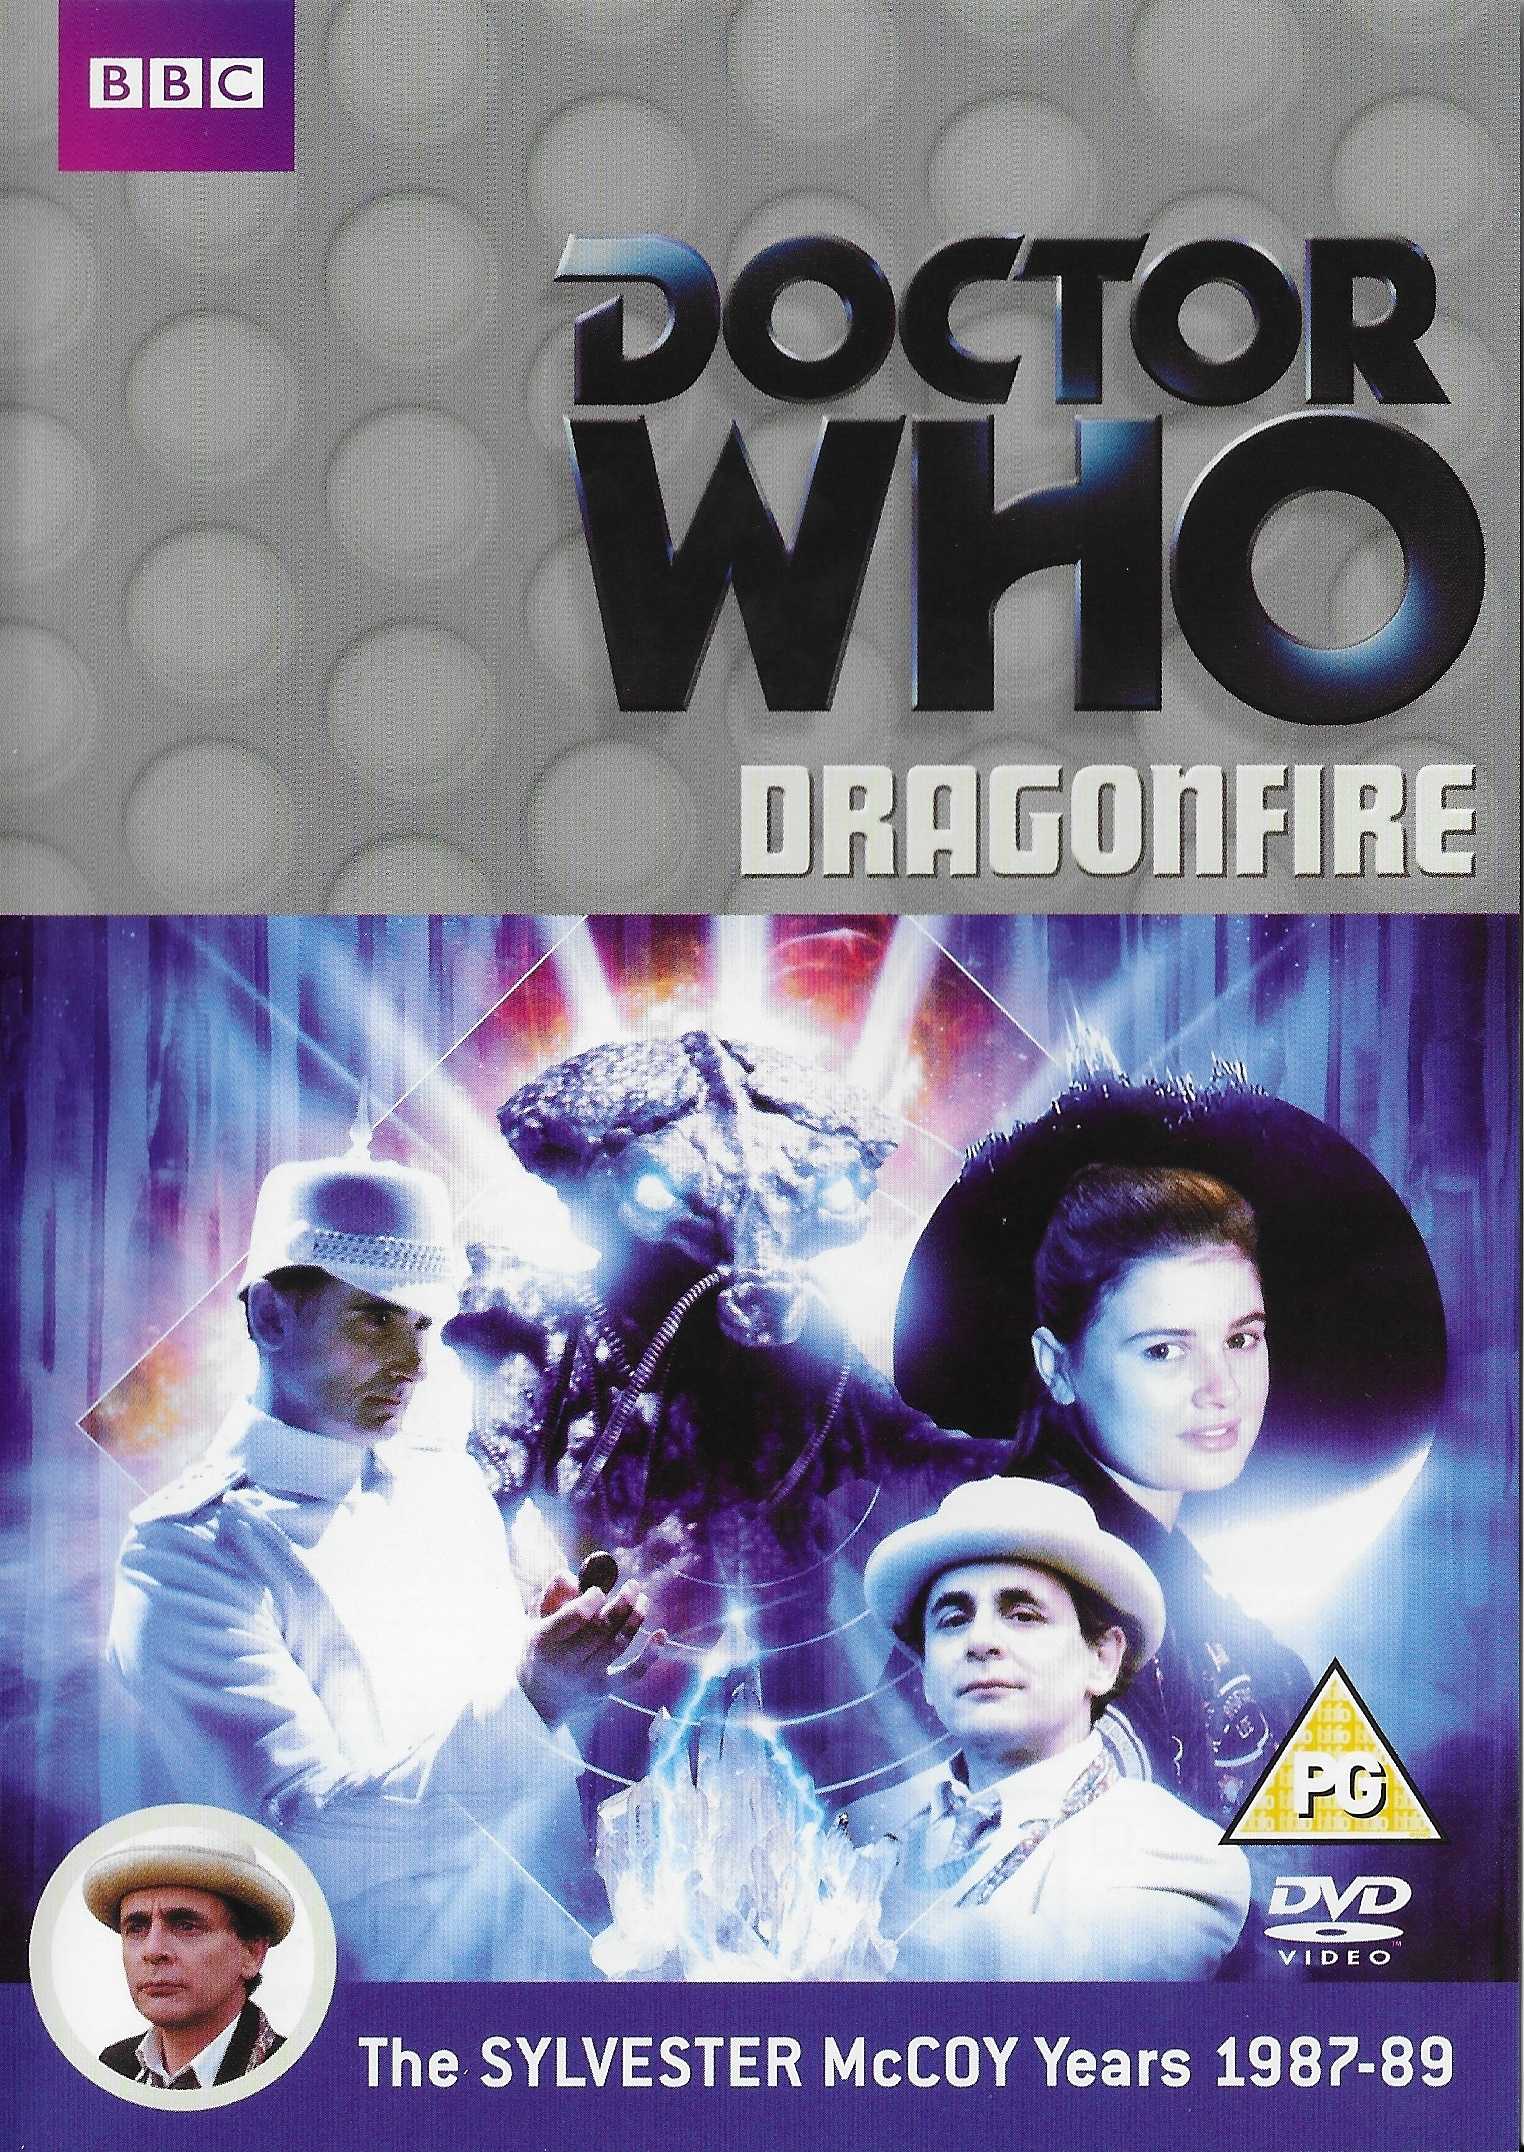 Picture of BBCDVD 3387A Doctor Who - Dragonfire by artist Ian Briggs from the BBC dvds - Records and Tapes library